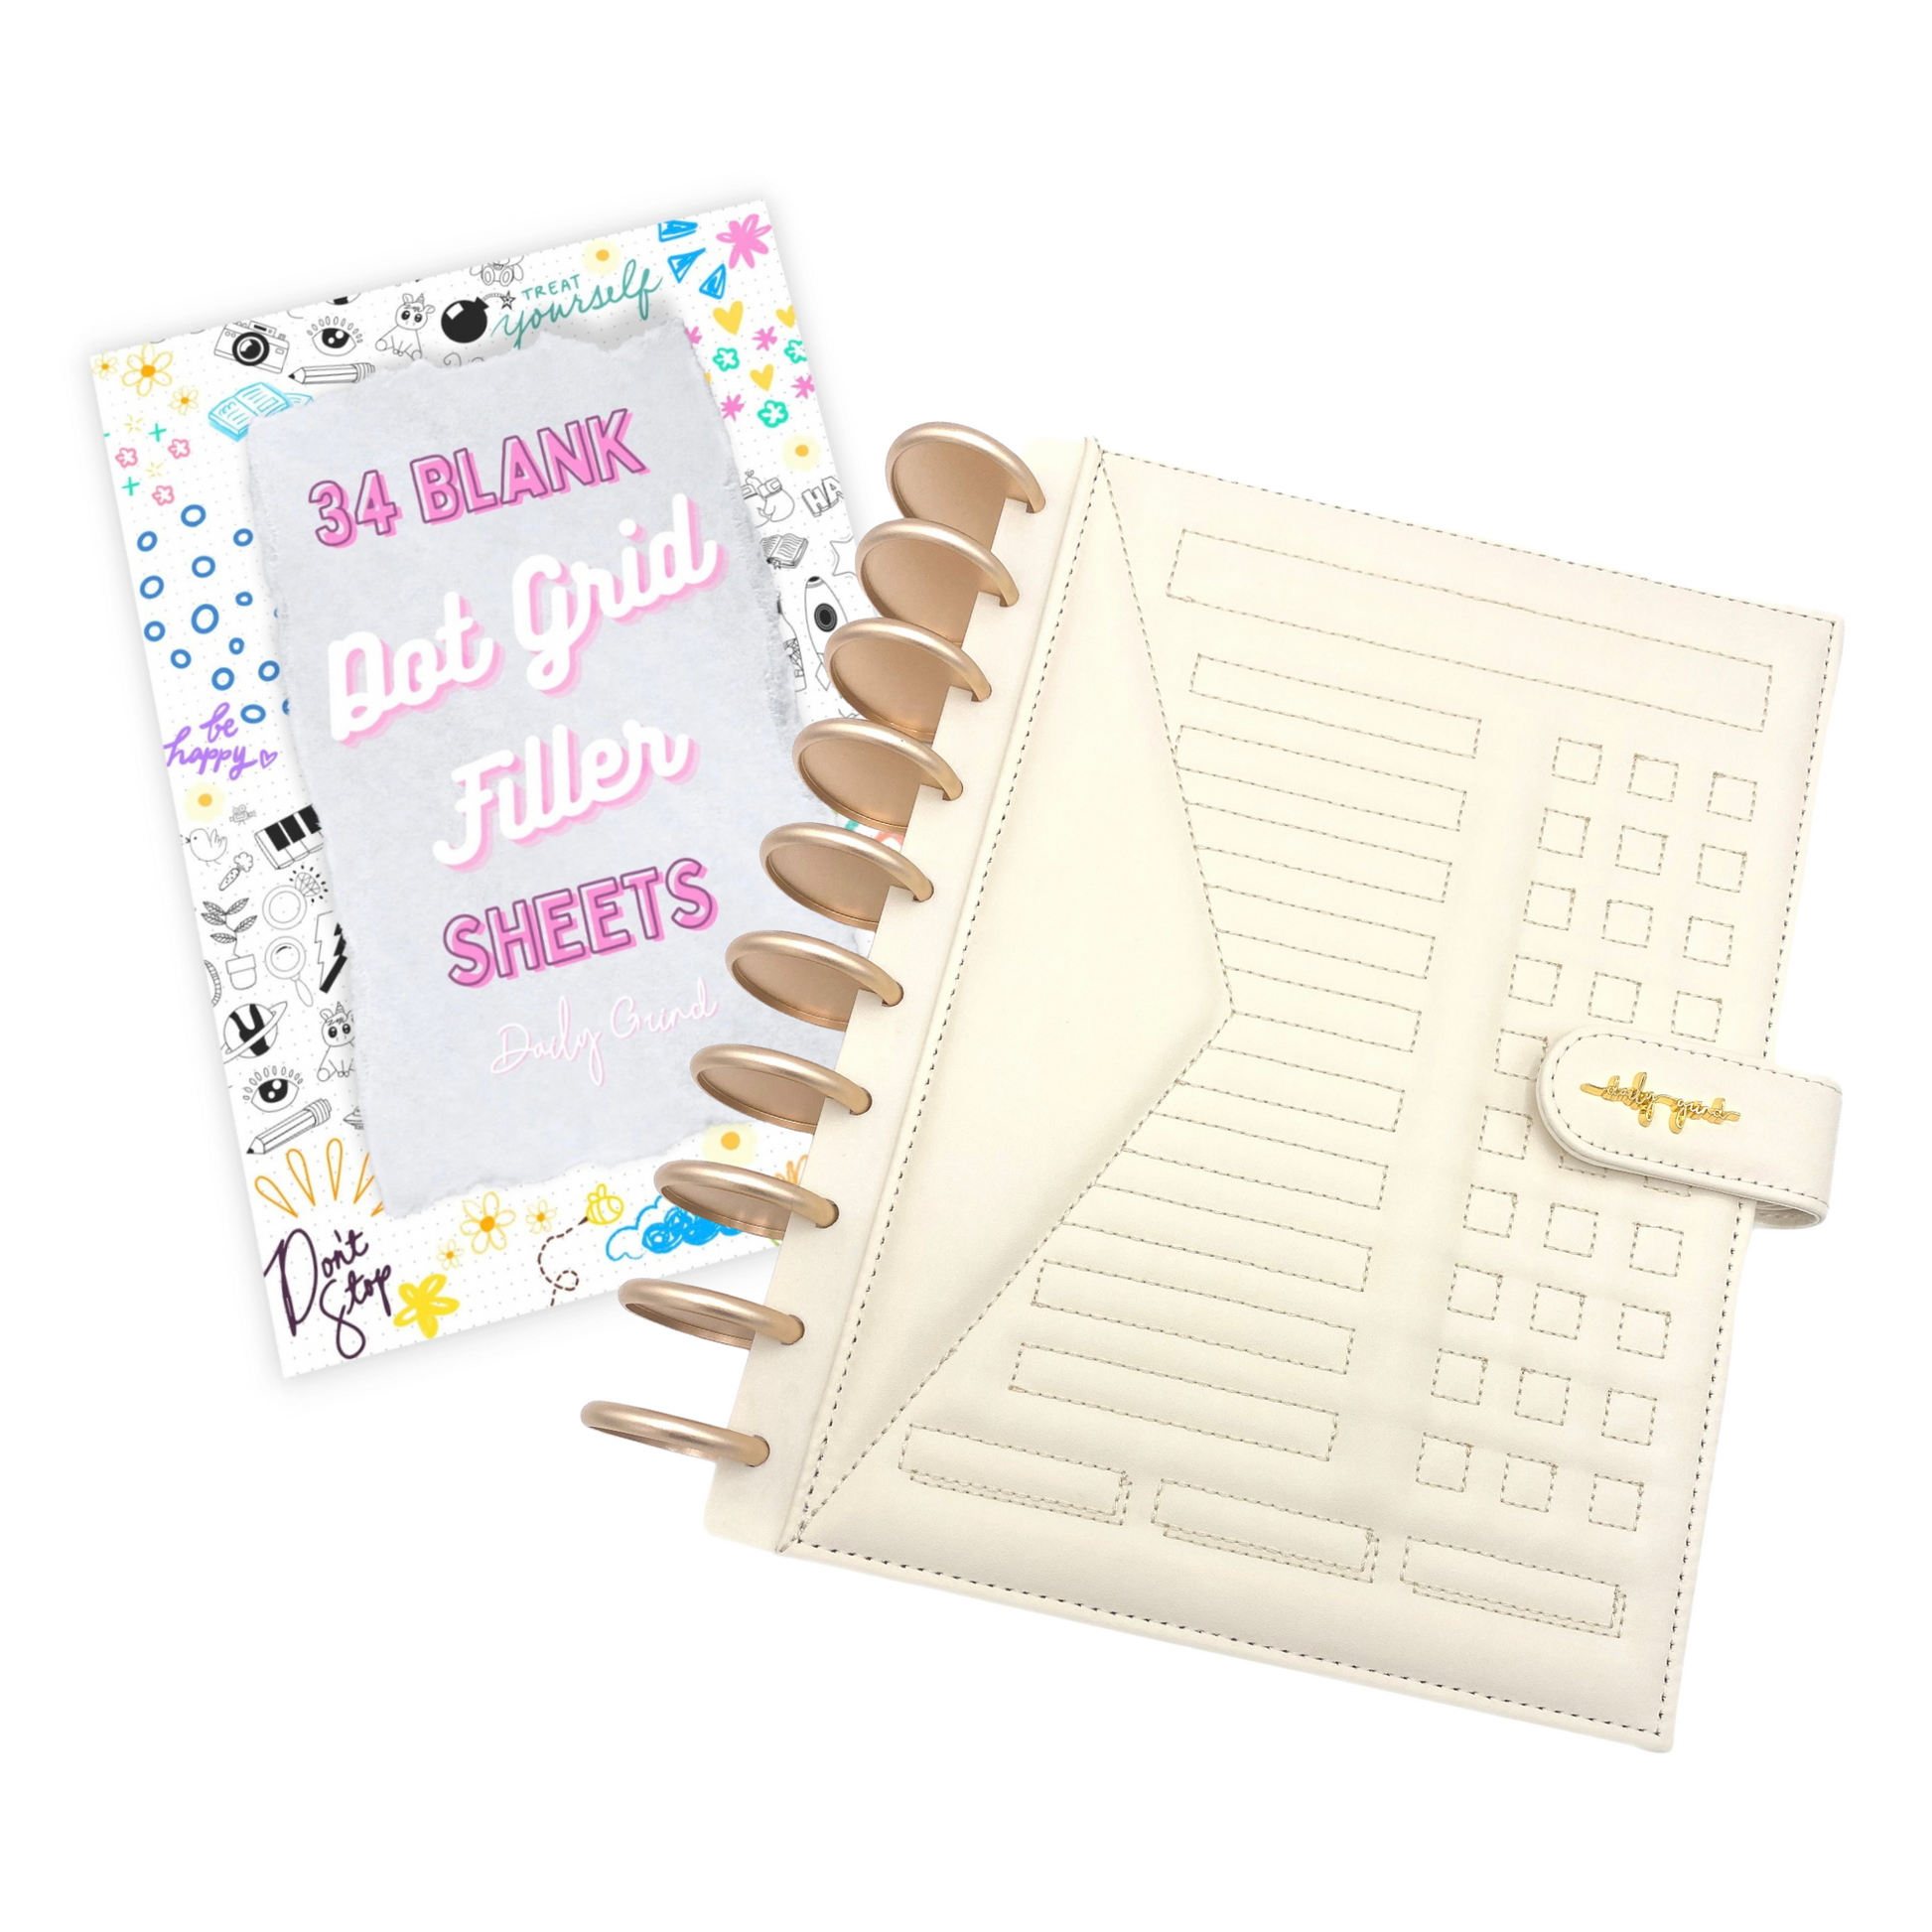 "34 Blank Dot Grid Filler Sheets" cover page and cream planner